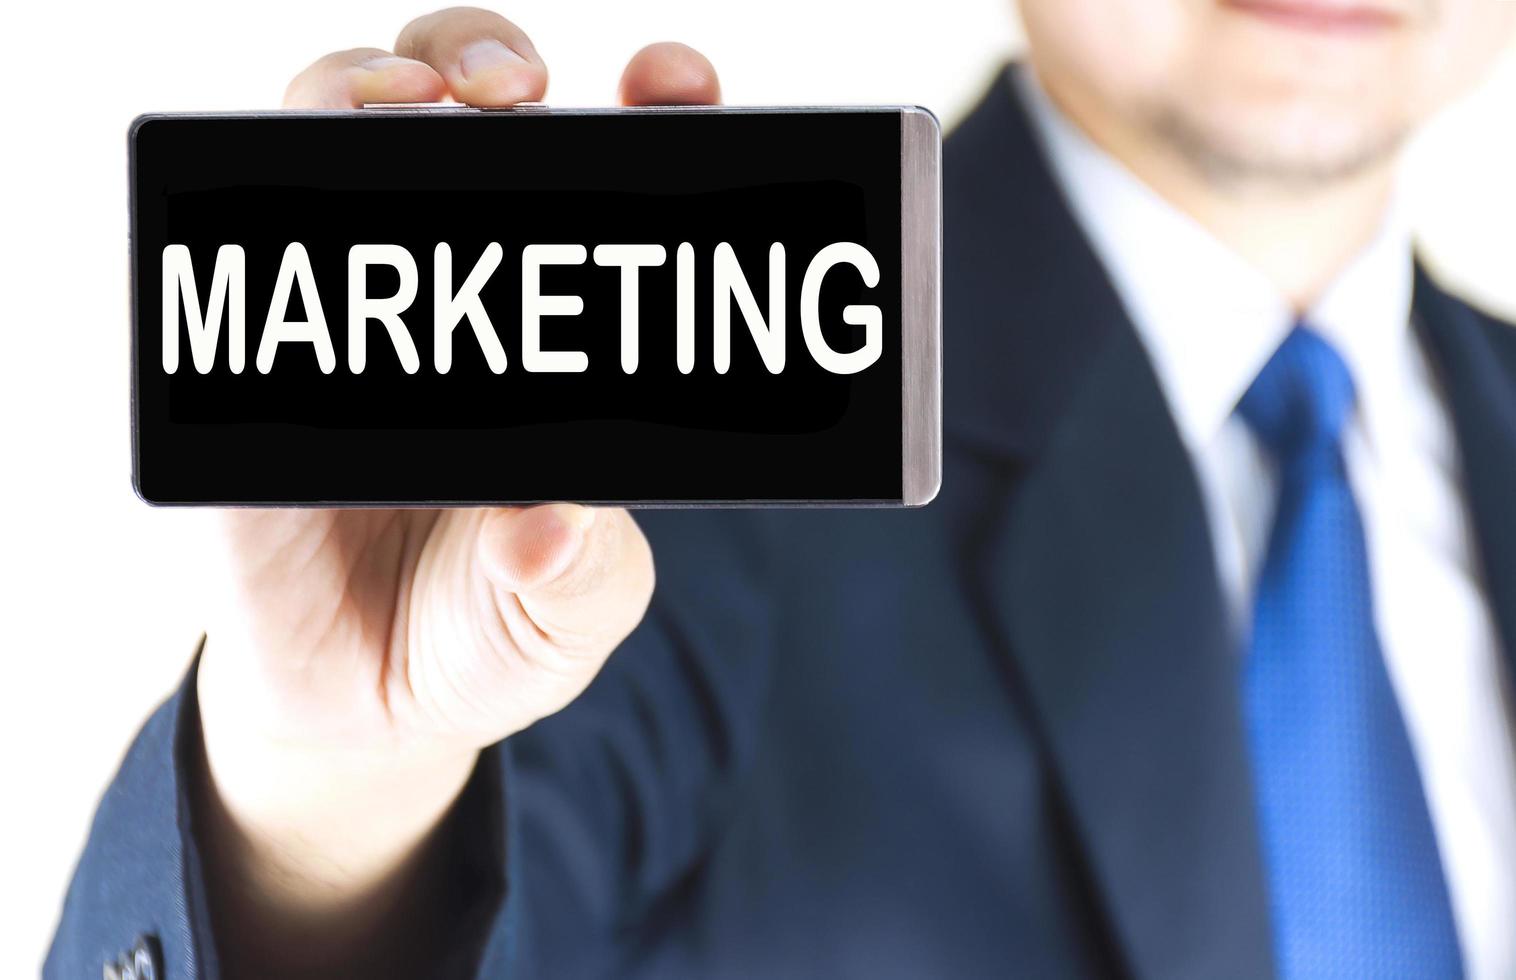 MARKETING word on mobile phone screen in blurred young businessman hand over white background, business concept photo